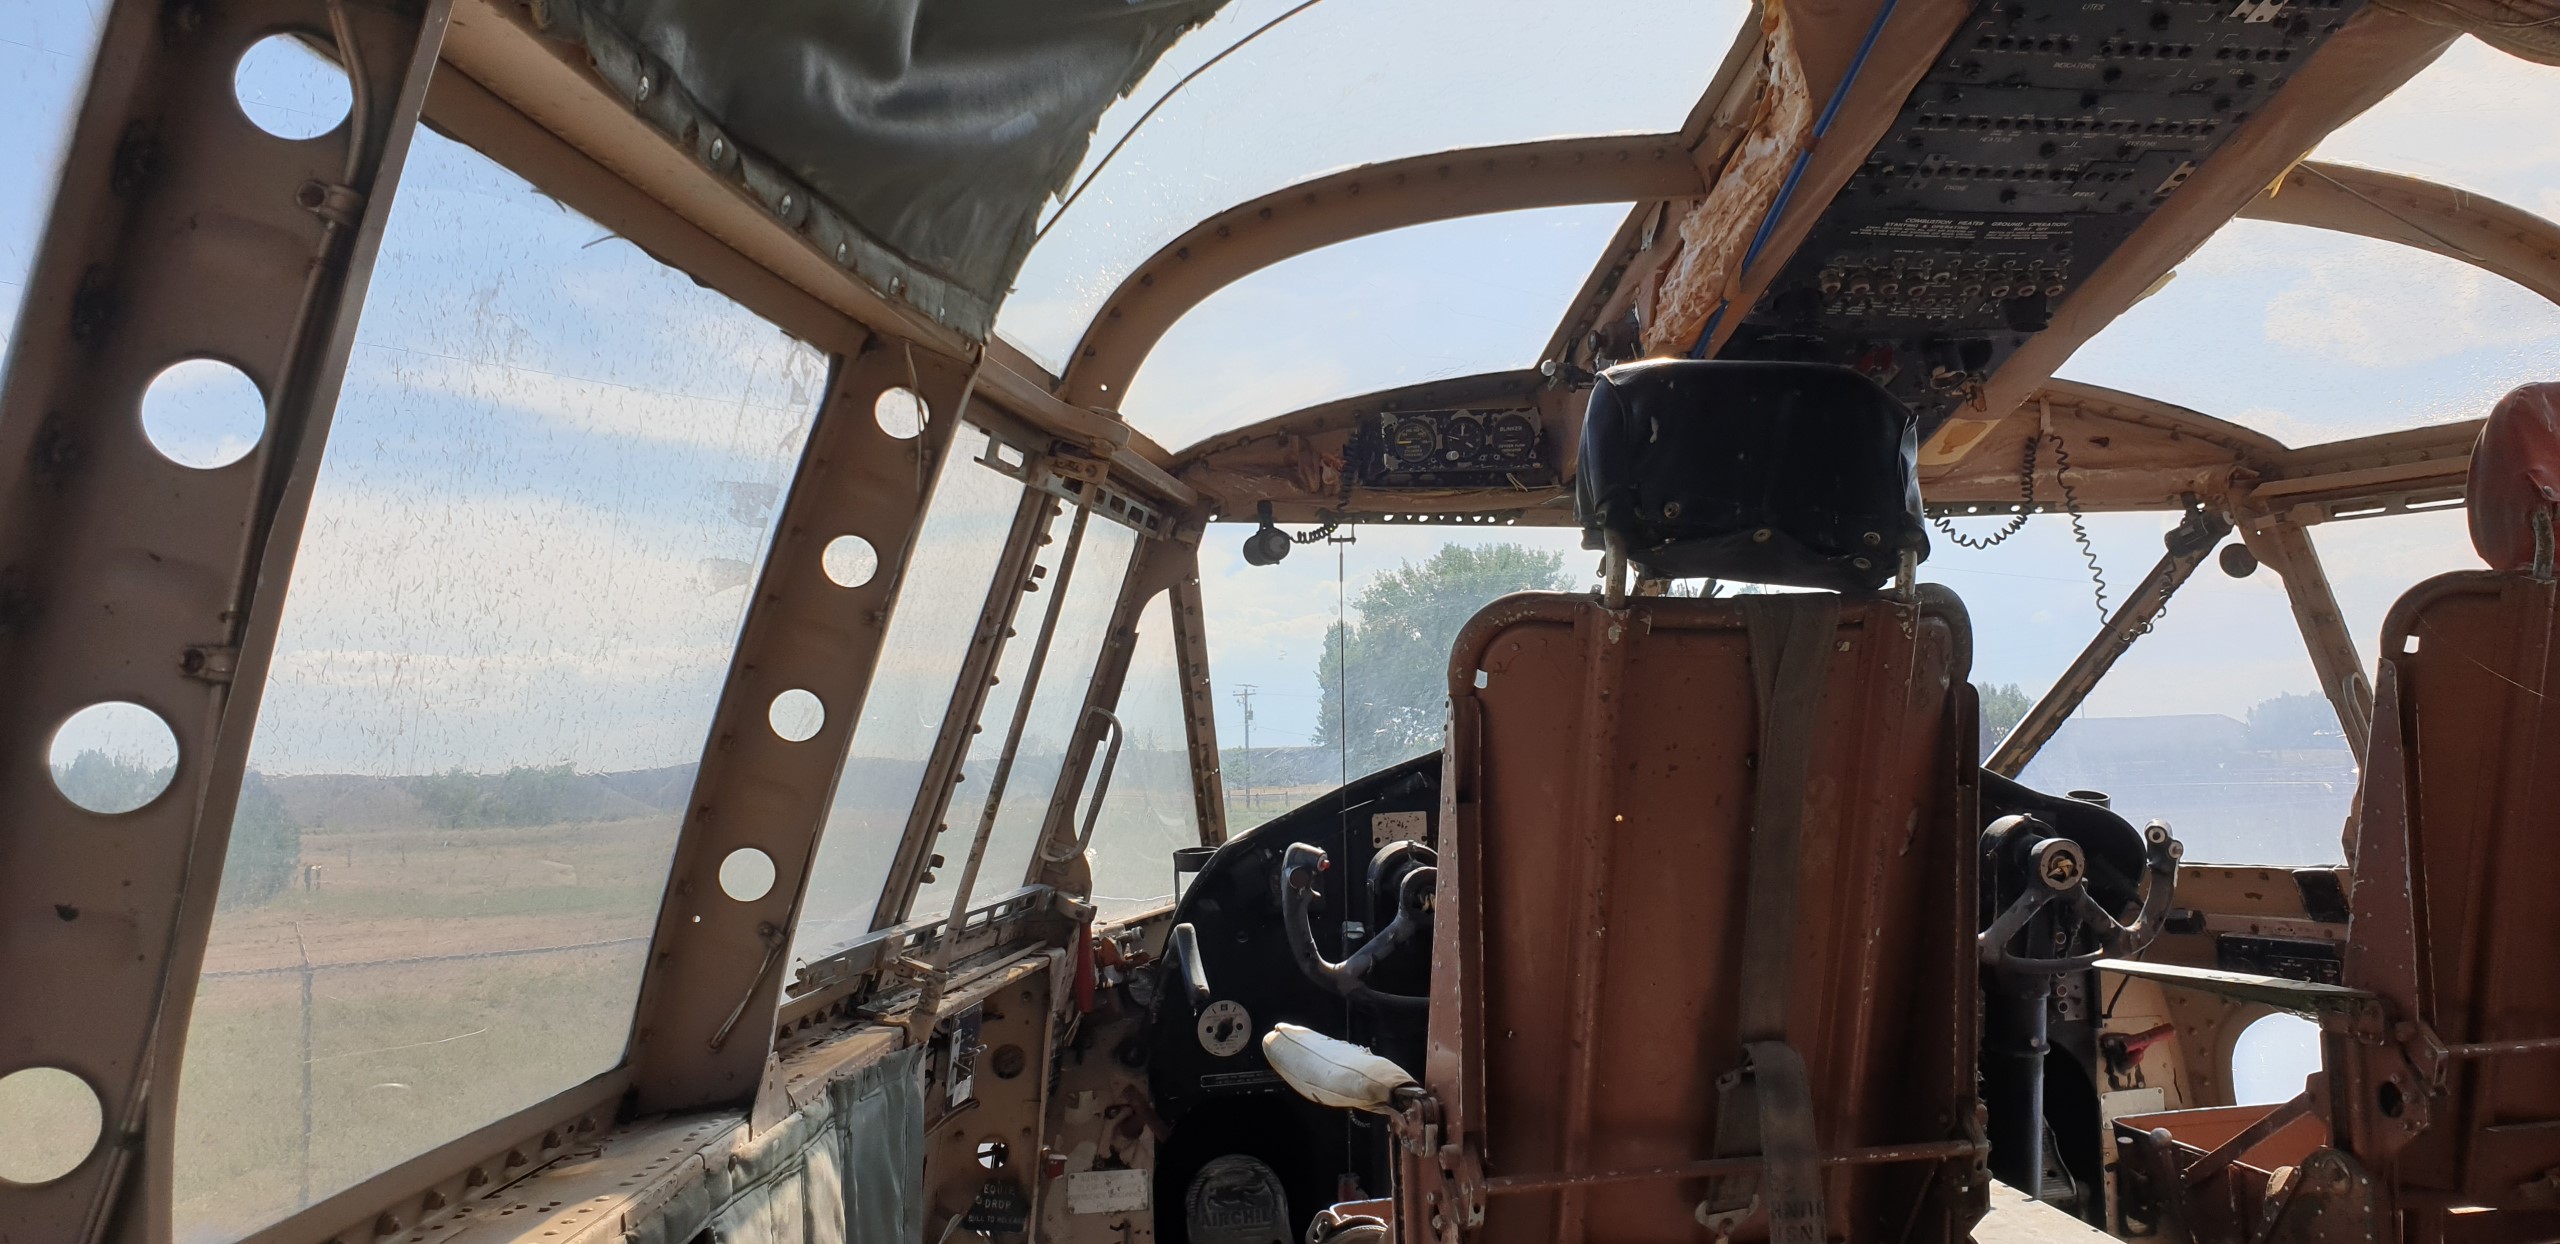 The cockpit of one of the aircrafts